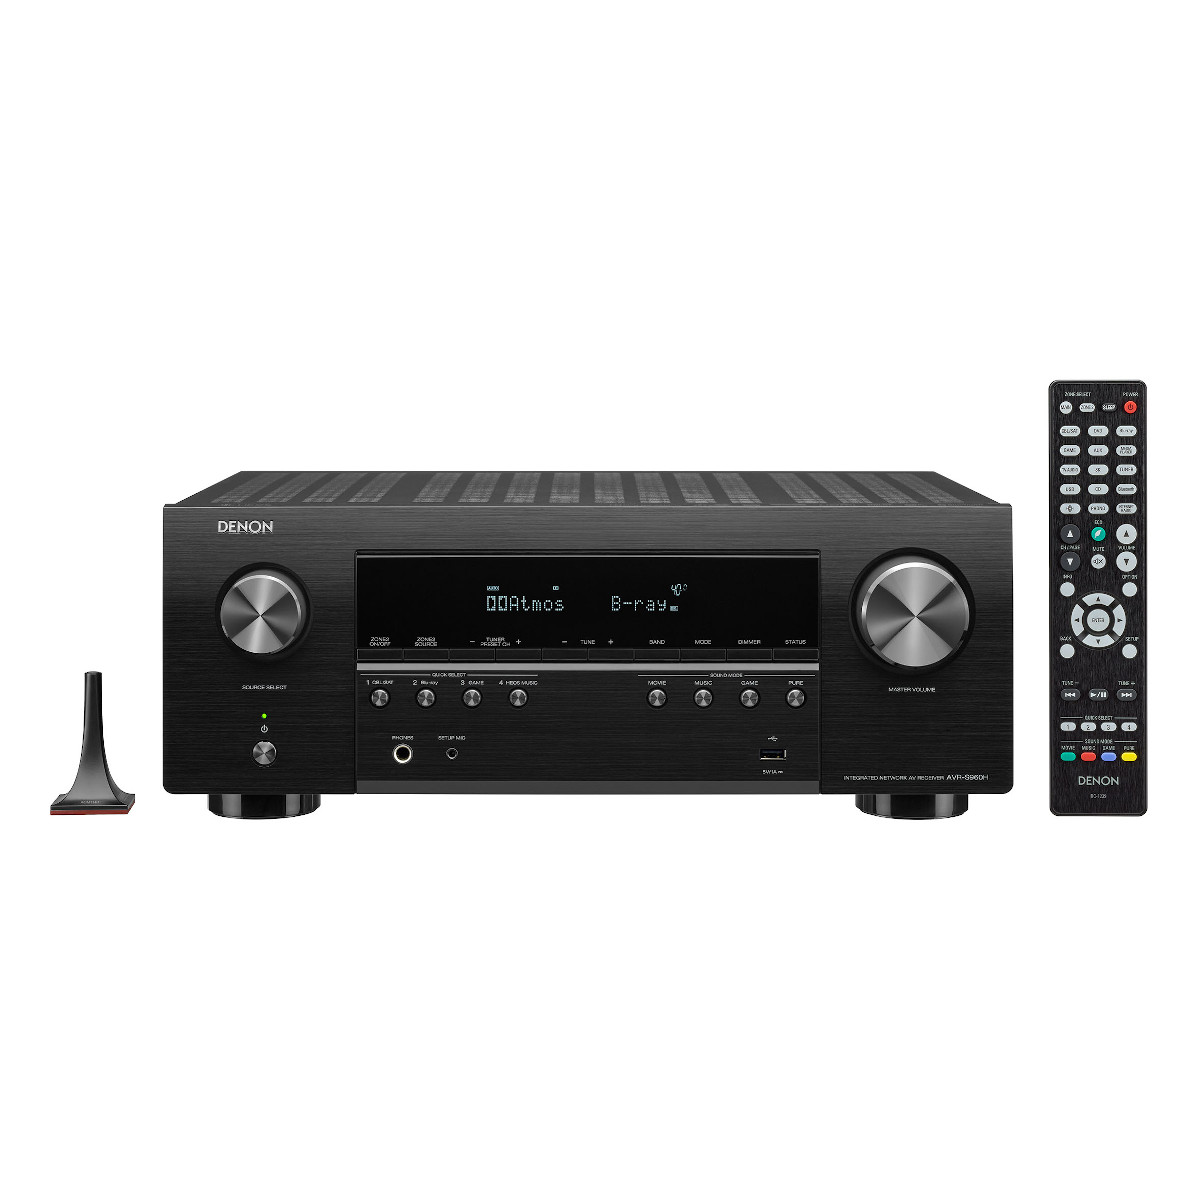 Denon AVR-S960H 7.2-Channel 4K Home Theater Receiver with 3D Audio and  Voice Control Voice Control - image 1 of 4